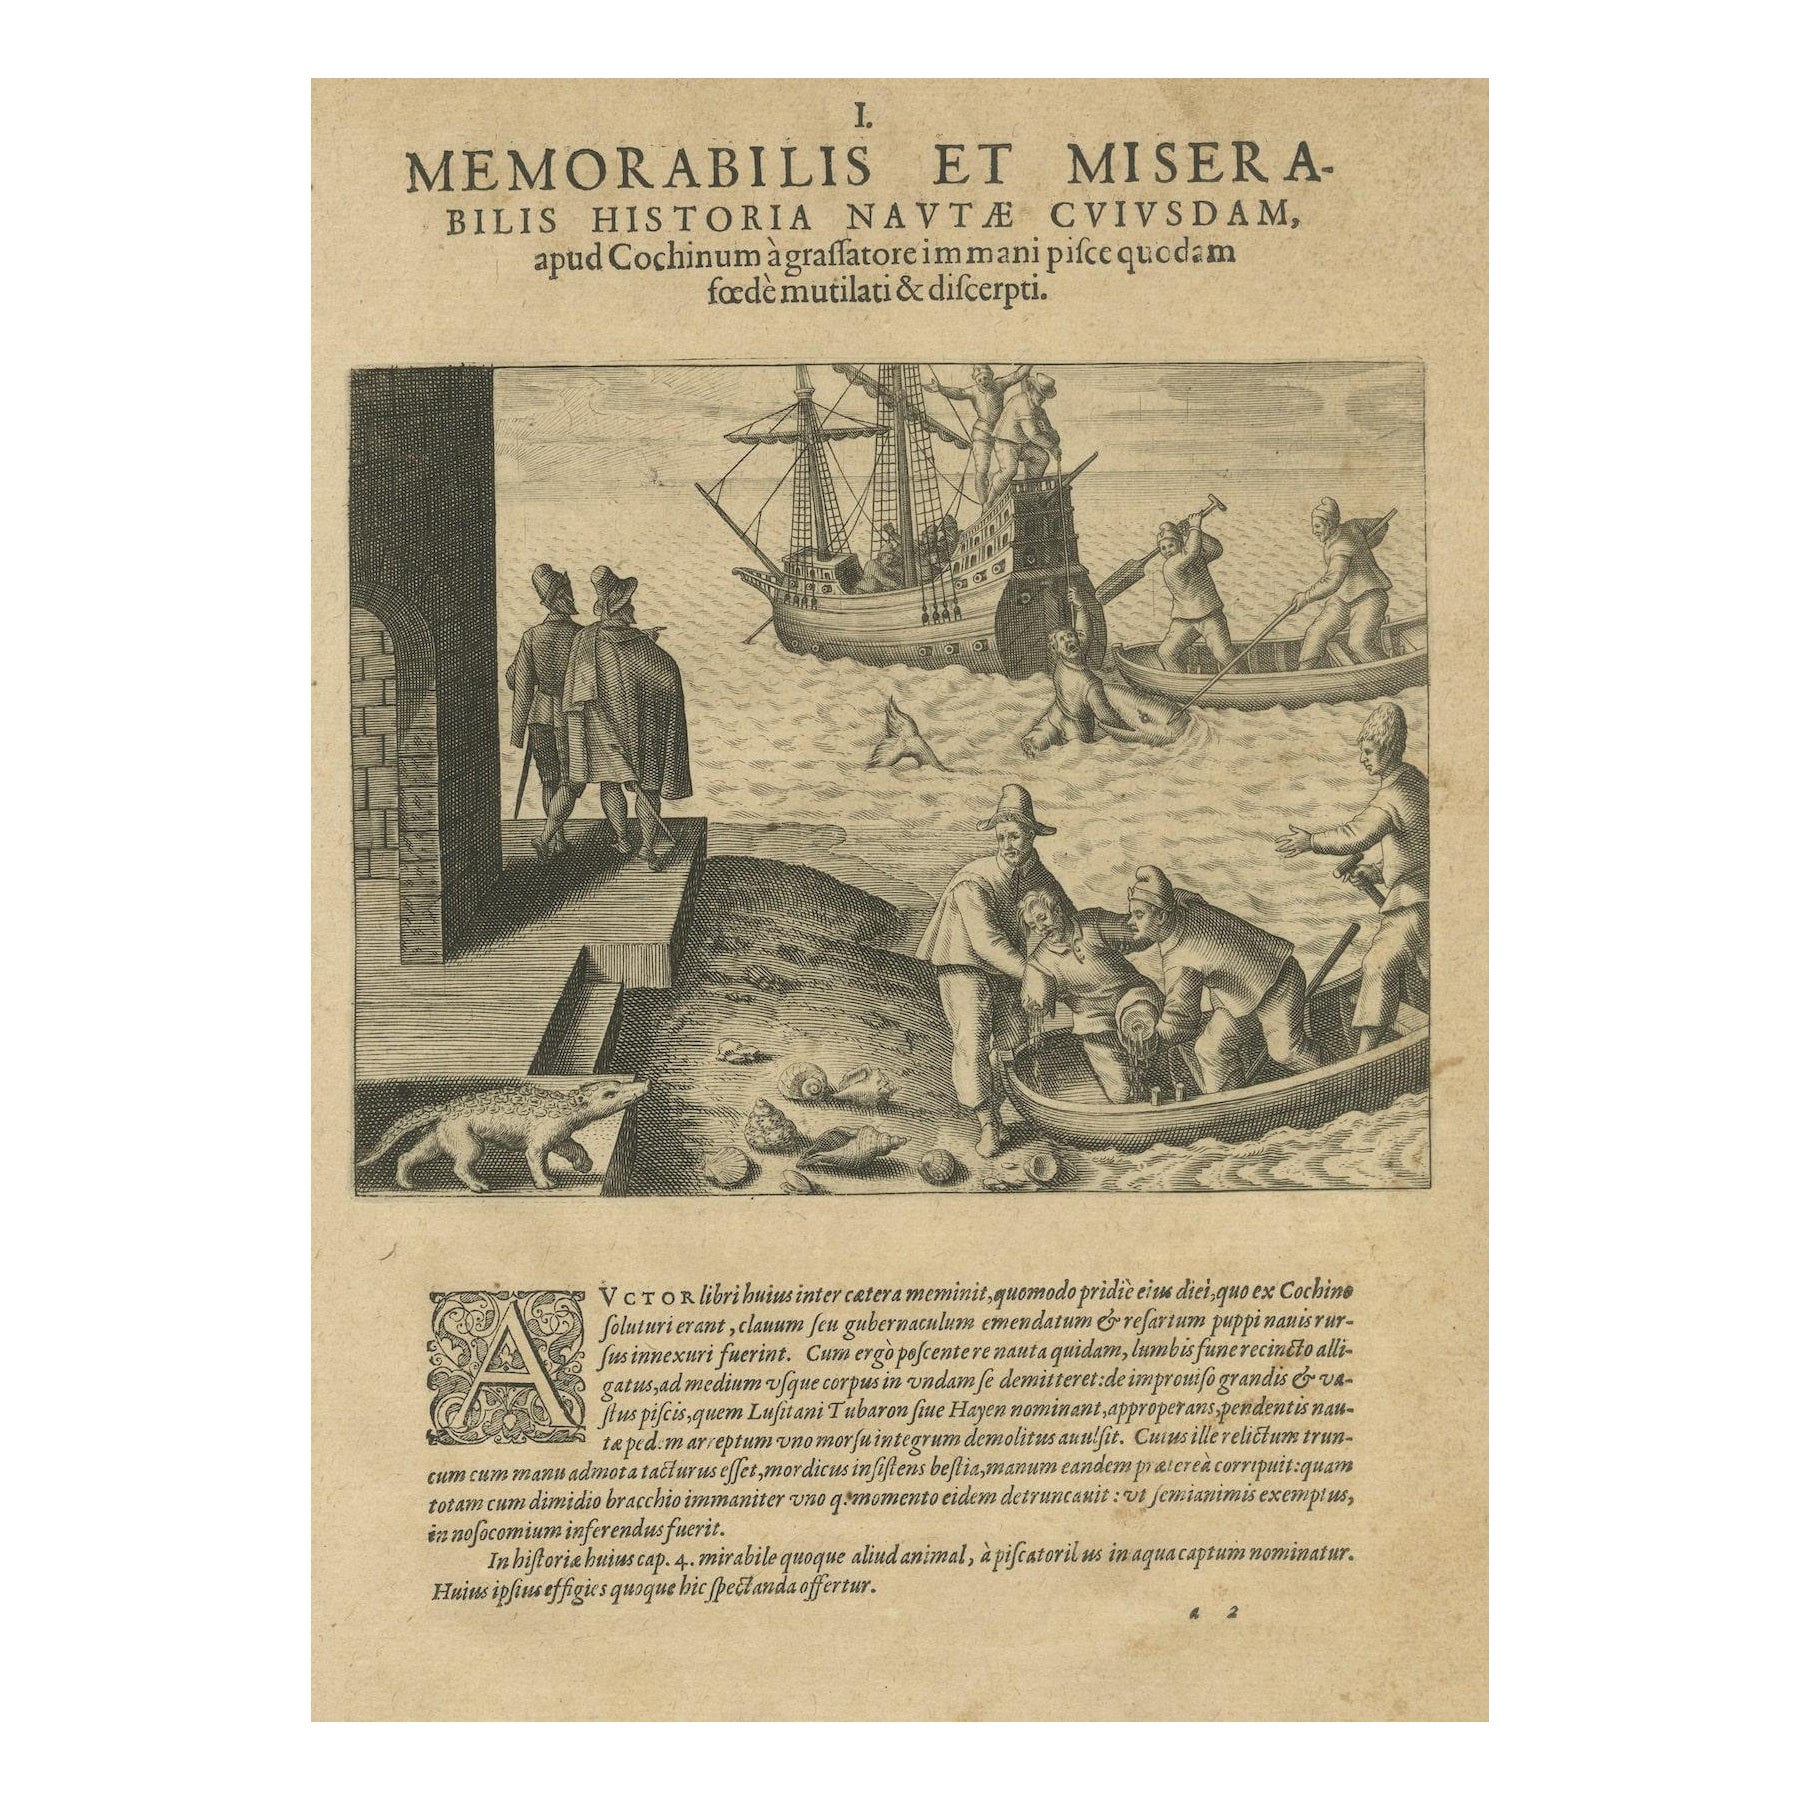 The de Bry Engraving of Maritime Marvels of Dutch Seafarers at Cochin, 1601